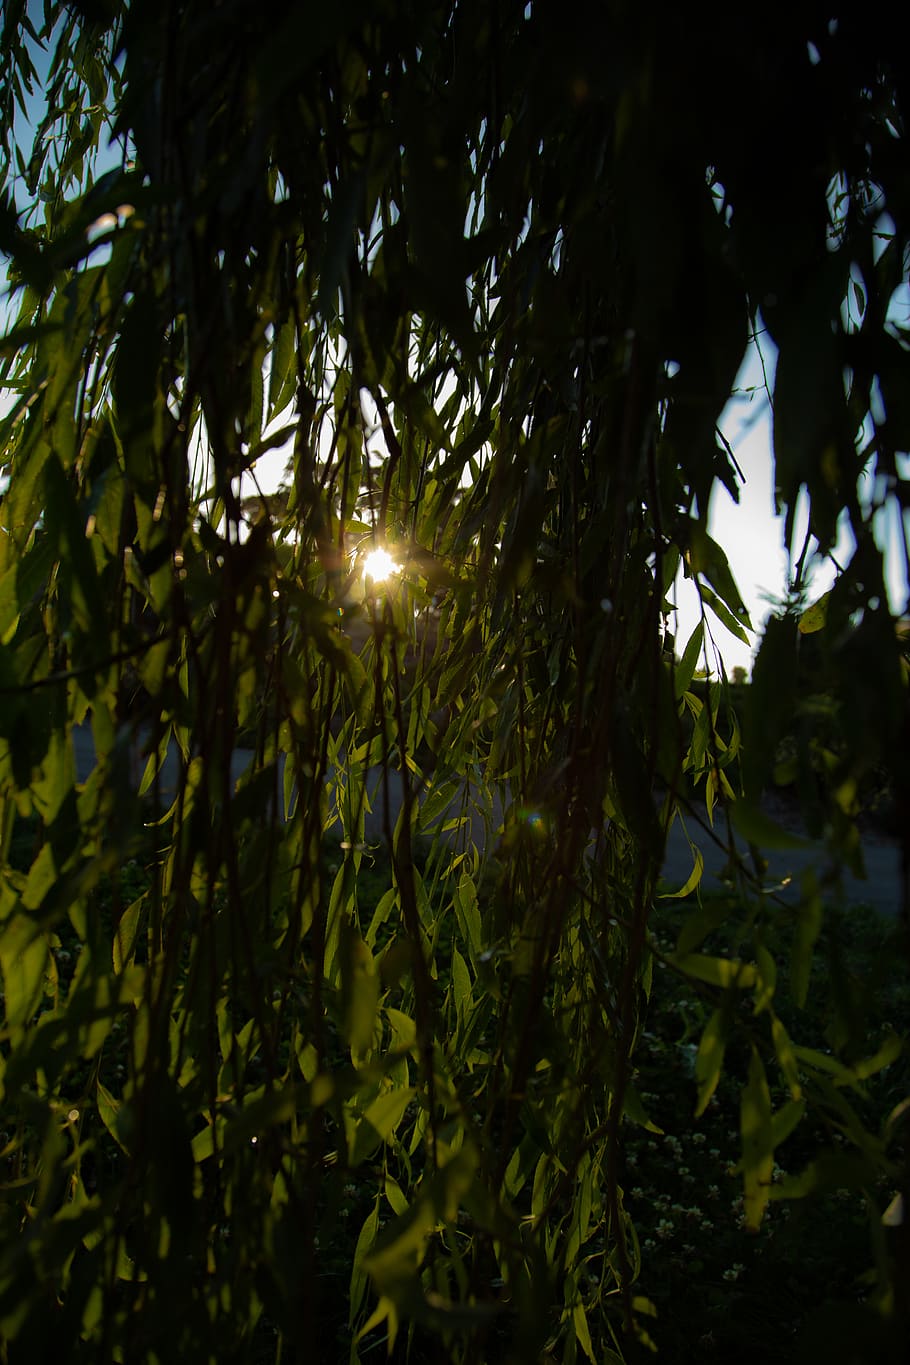 Sun filtering through the leaves of a willow tree